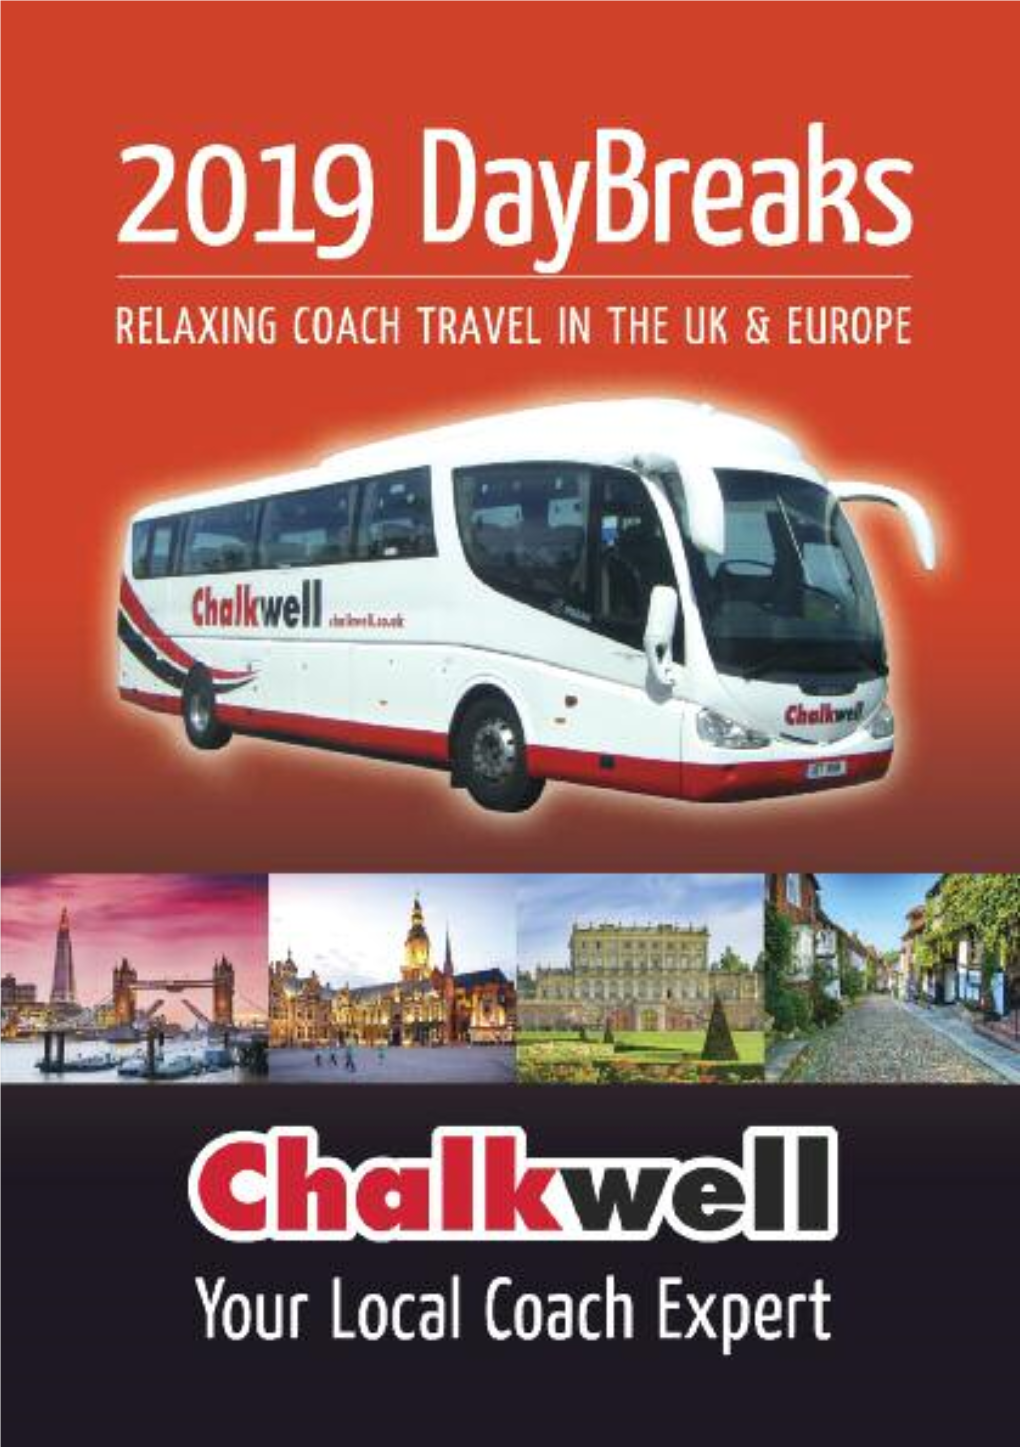 Call Us on 01795 423982 Or Visit 47 BROCHURE DESIGNED and PRODUCED by YELLOW JERSEY, TEL 07957 749752 Book Your Chalkwell Daybreak At